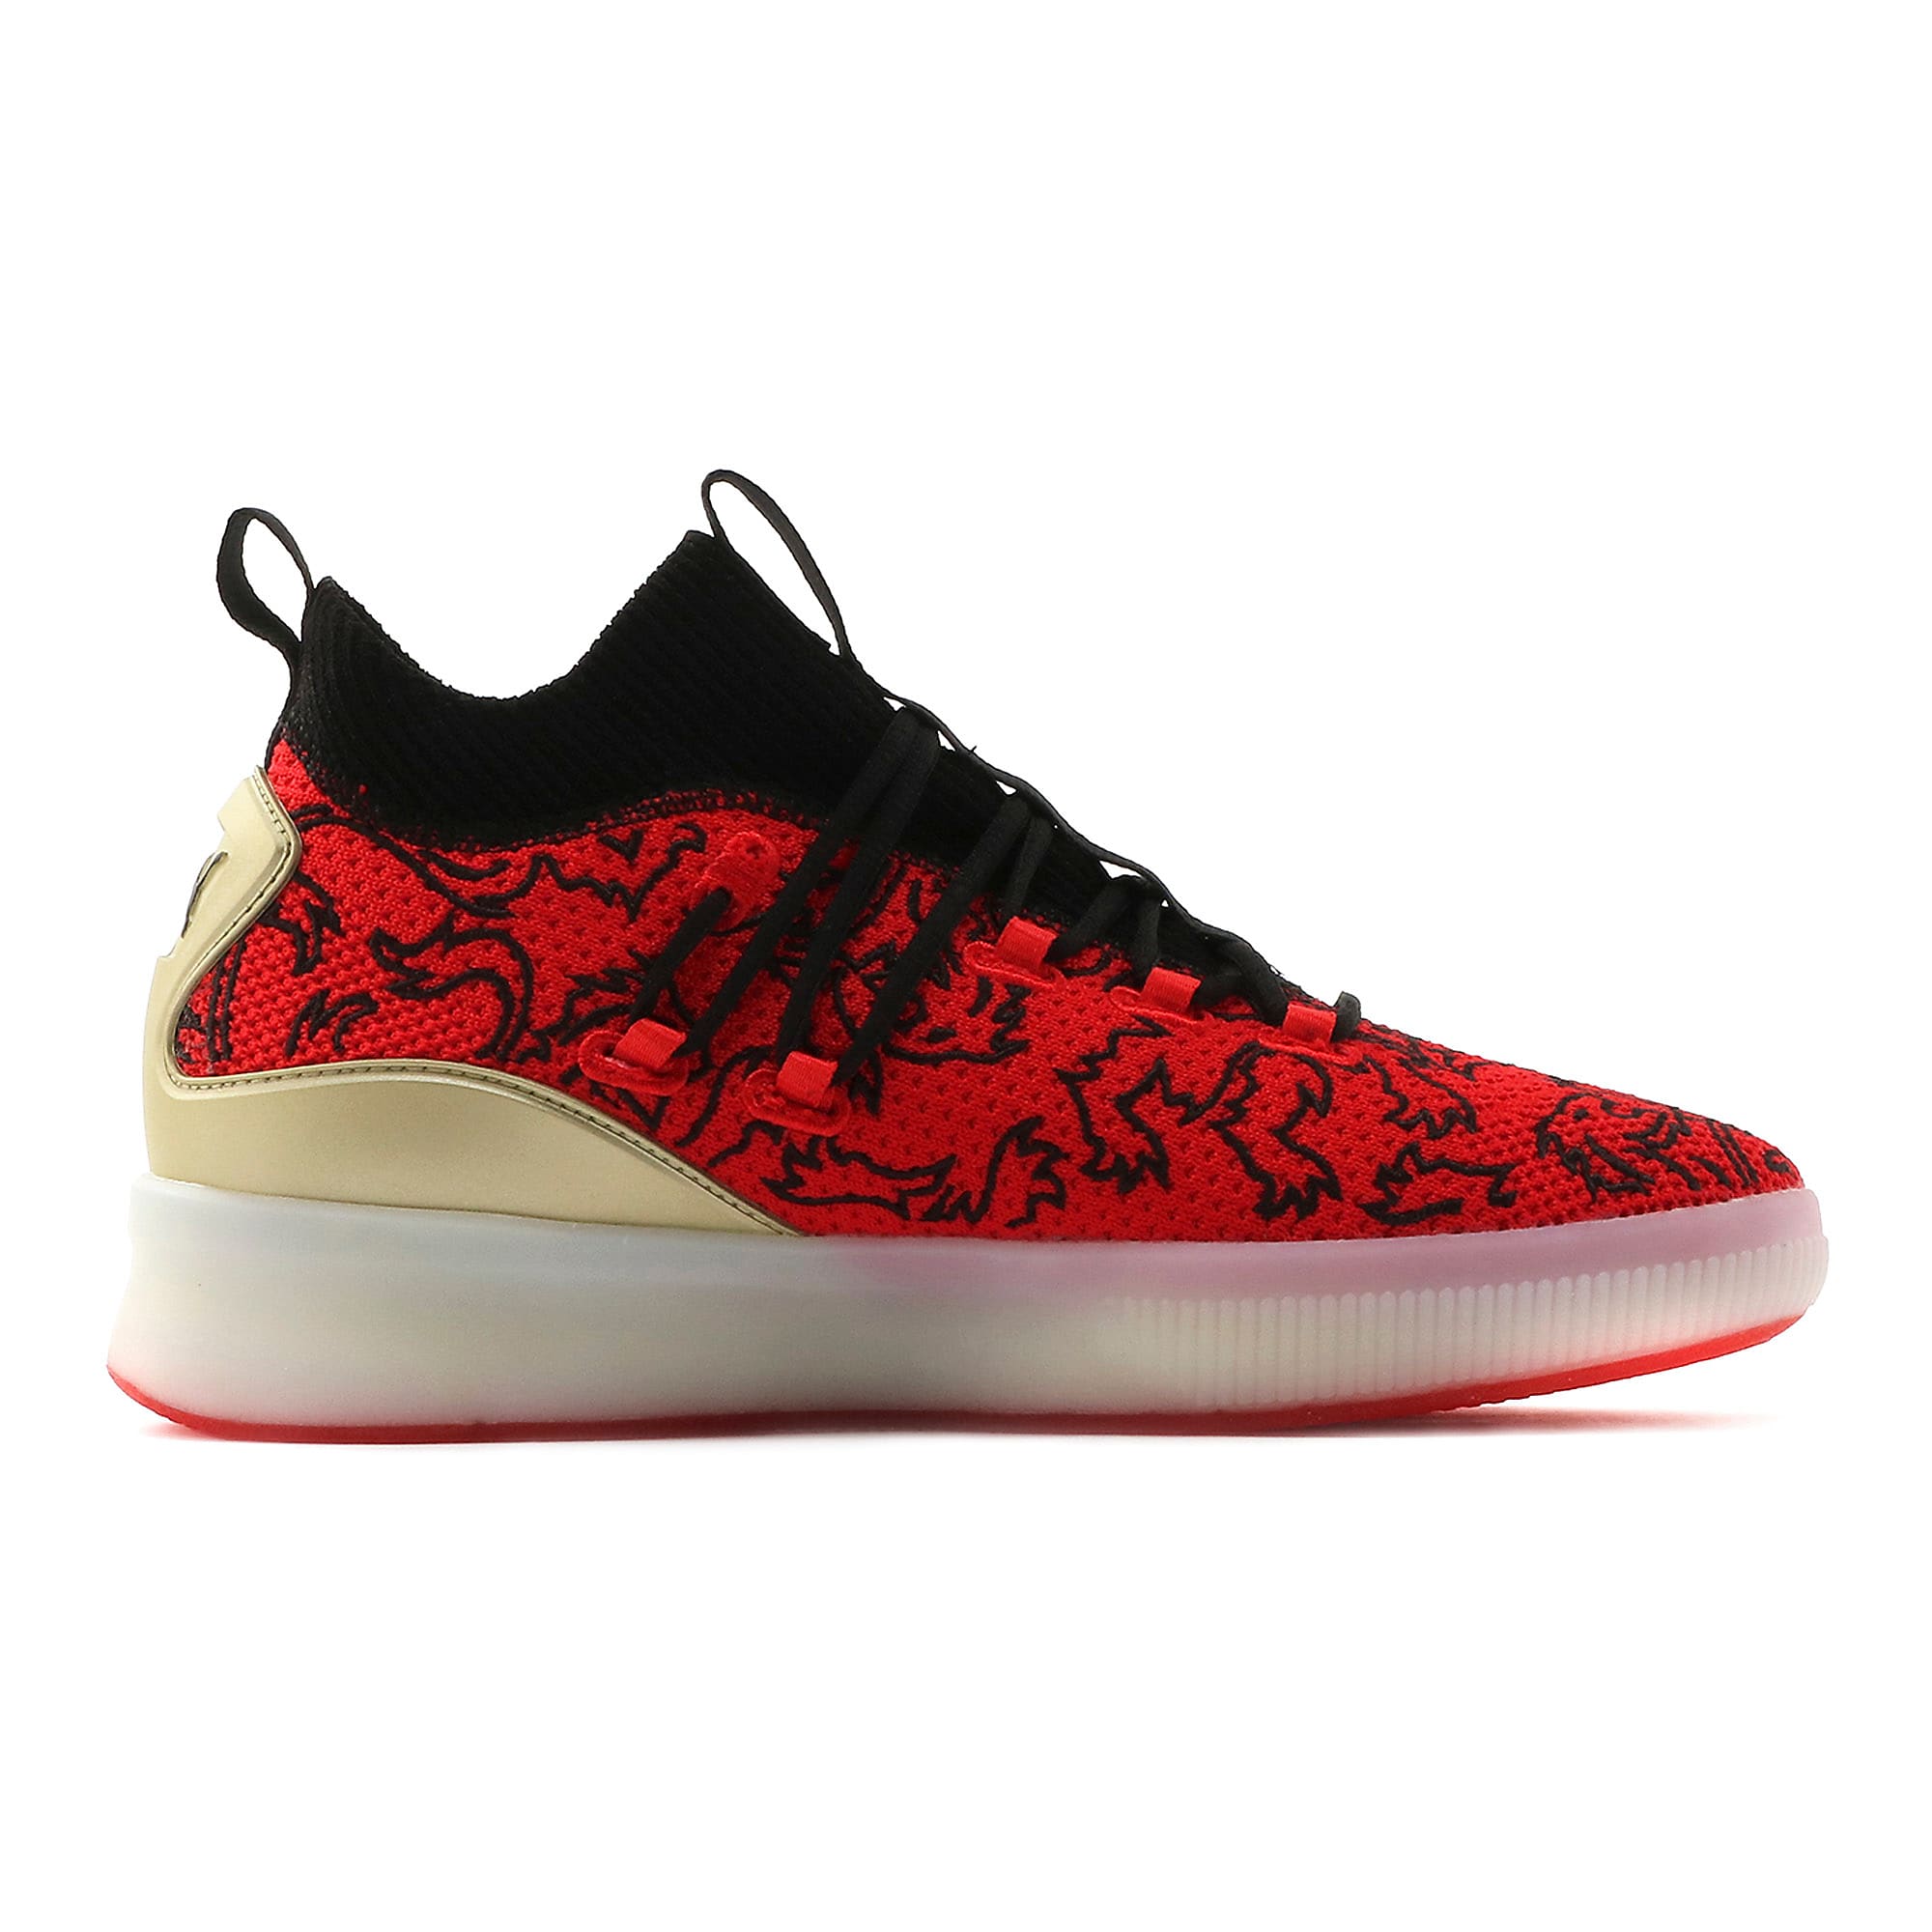 PUMA CLYDE COURT "LONDON" CALLING  RED